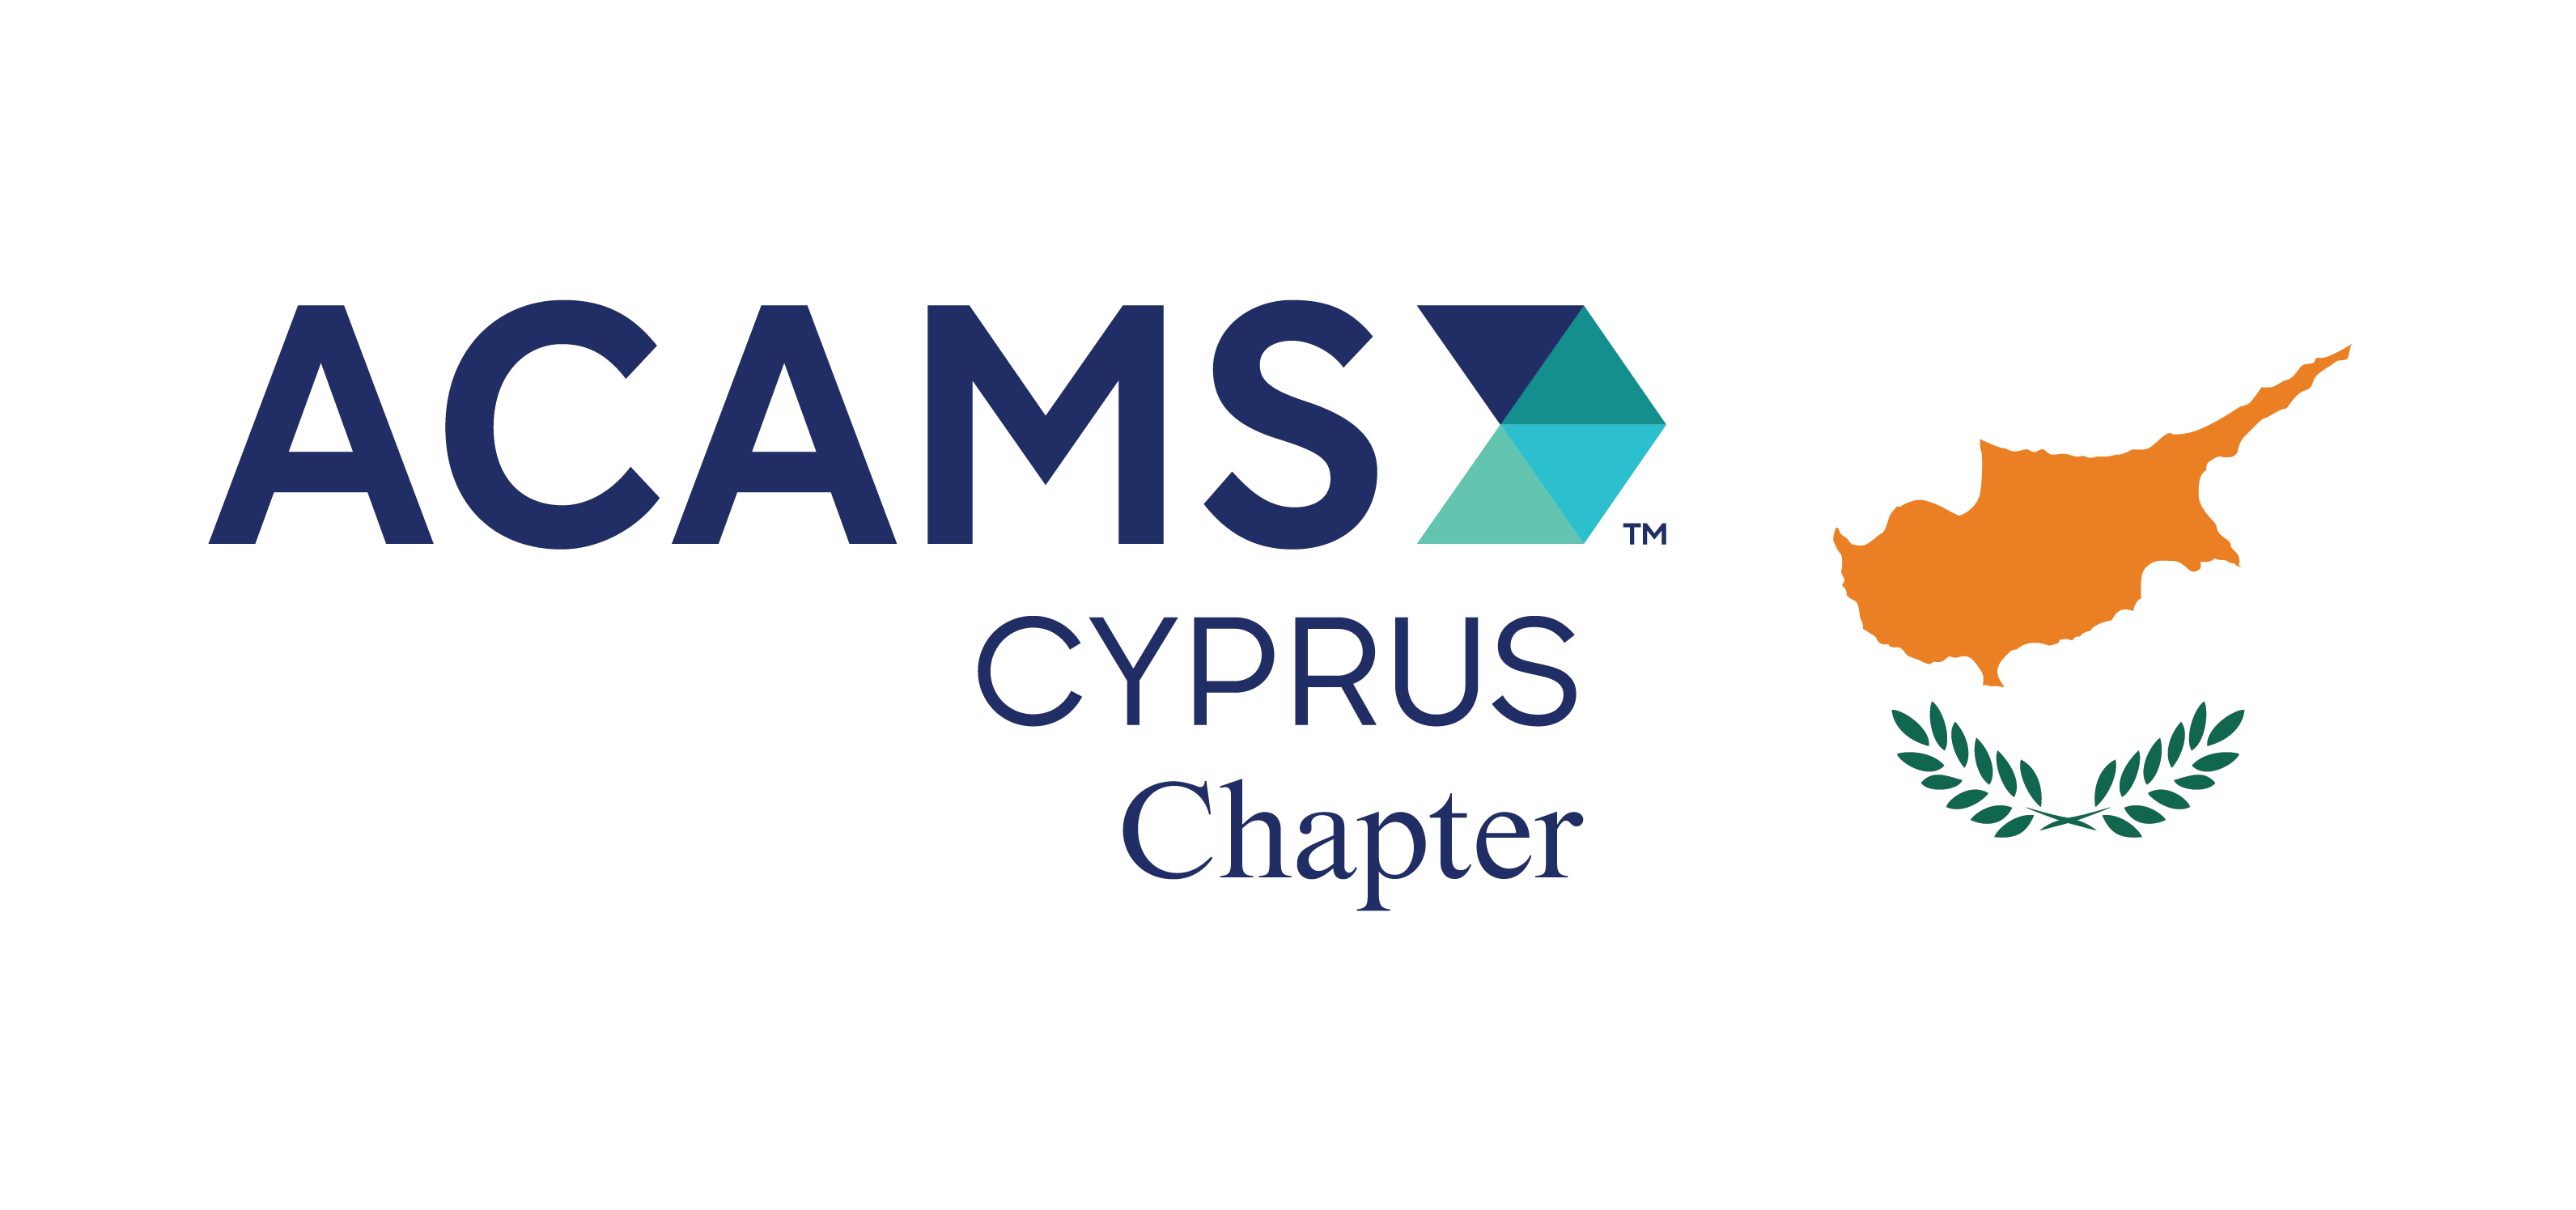 ACAMS Cyprus Chapter